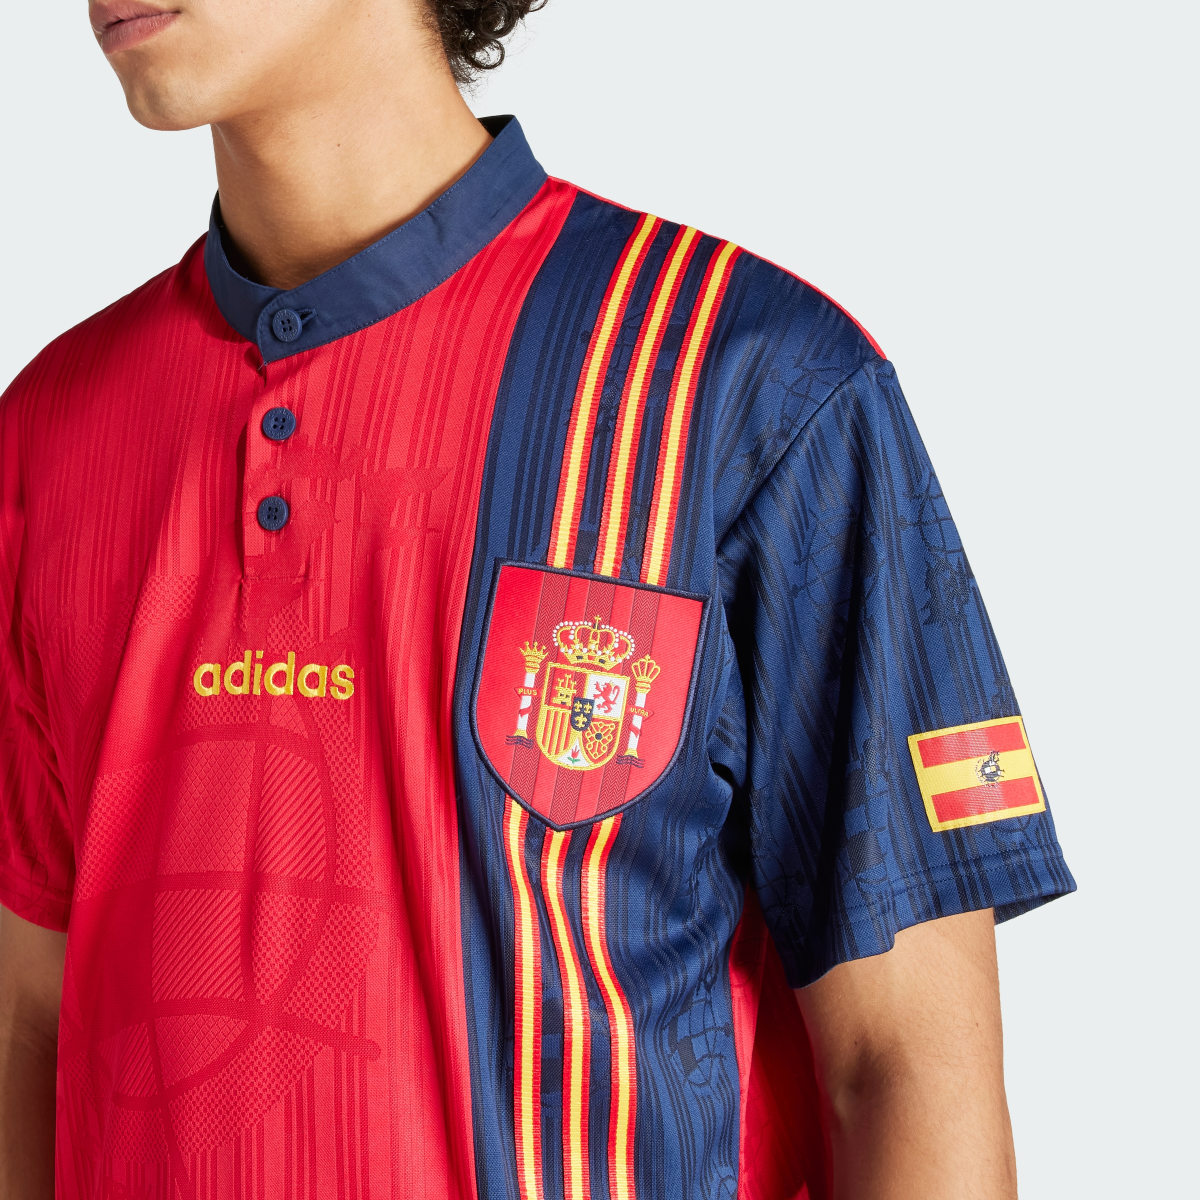 Adidas Spain 1996 Home Jersey. 7